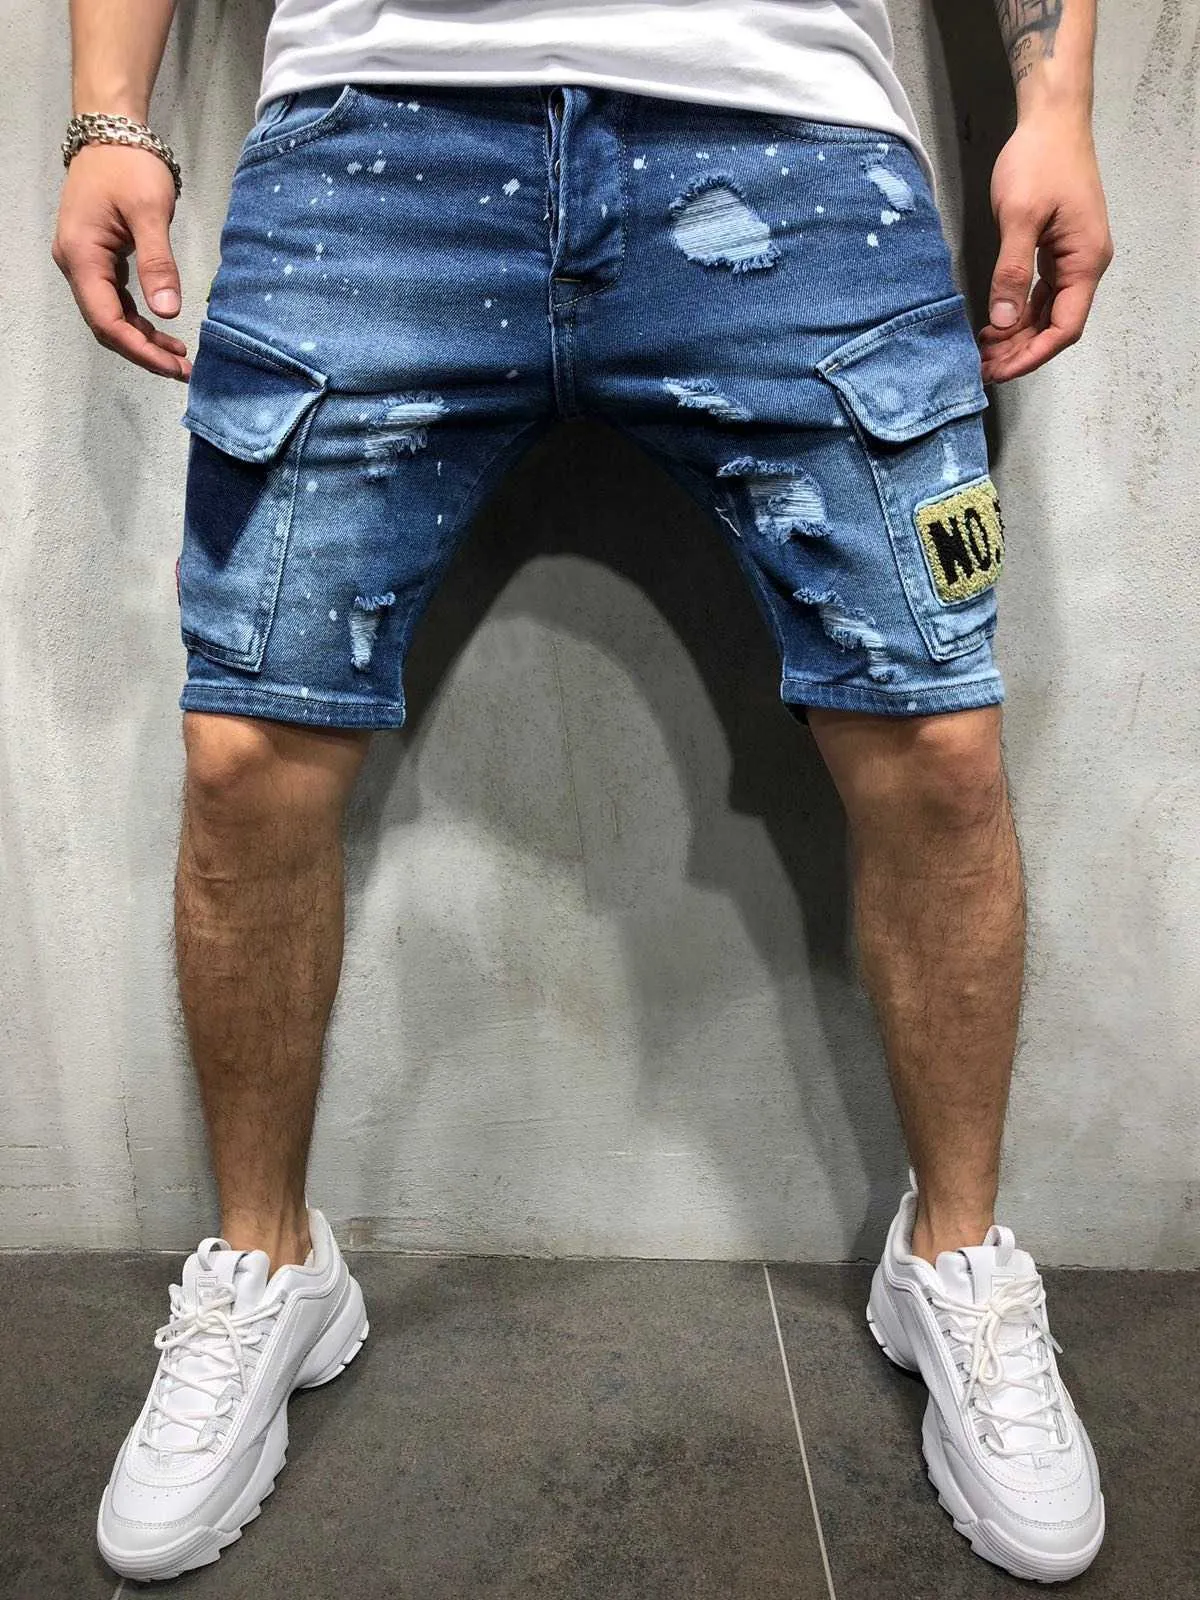 2021 New Style Men Stretchy Ripped Skinny Biker Embroidery Print Jeans Pocket Destroyed Taped Slim Fit High Quality Denim Shorts X0621